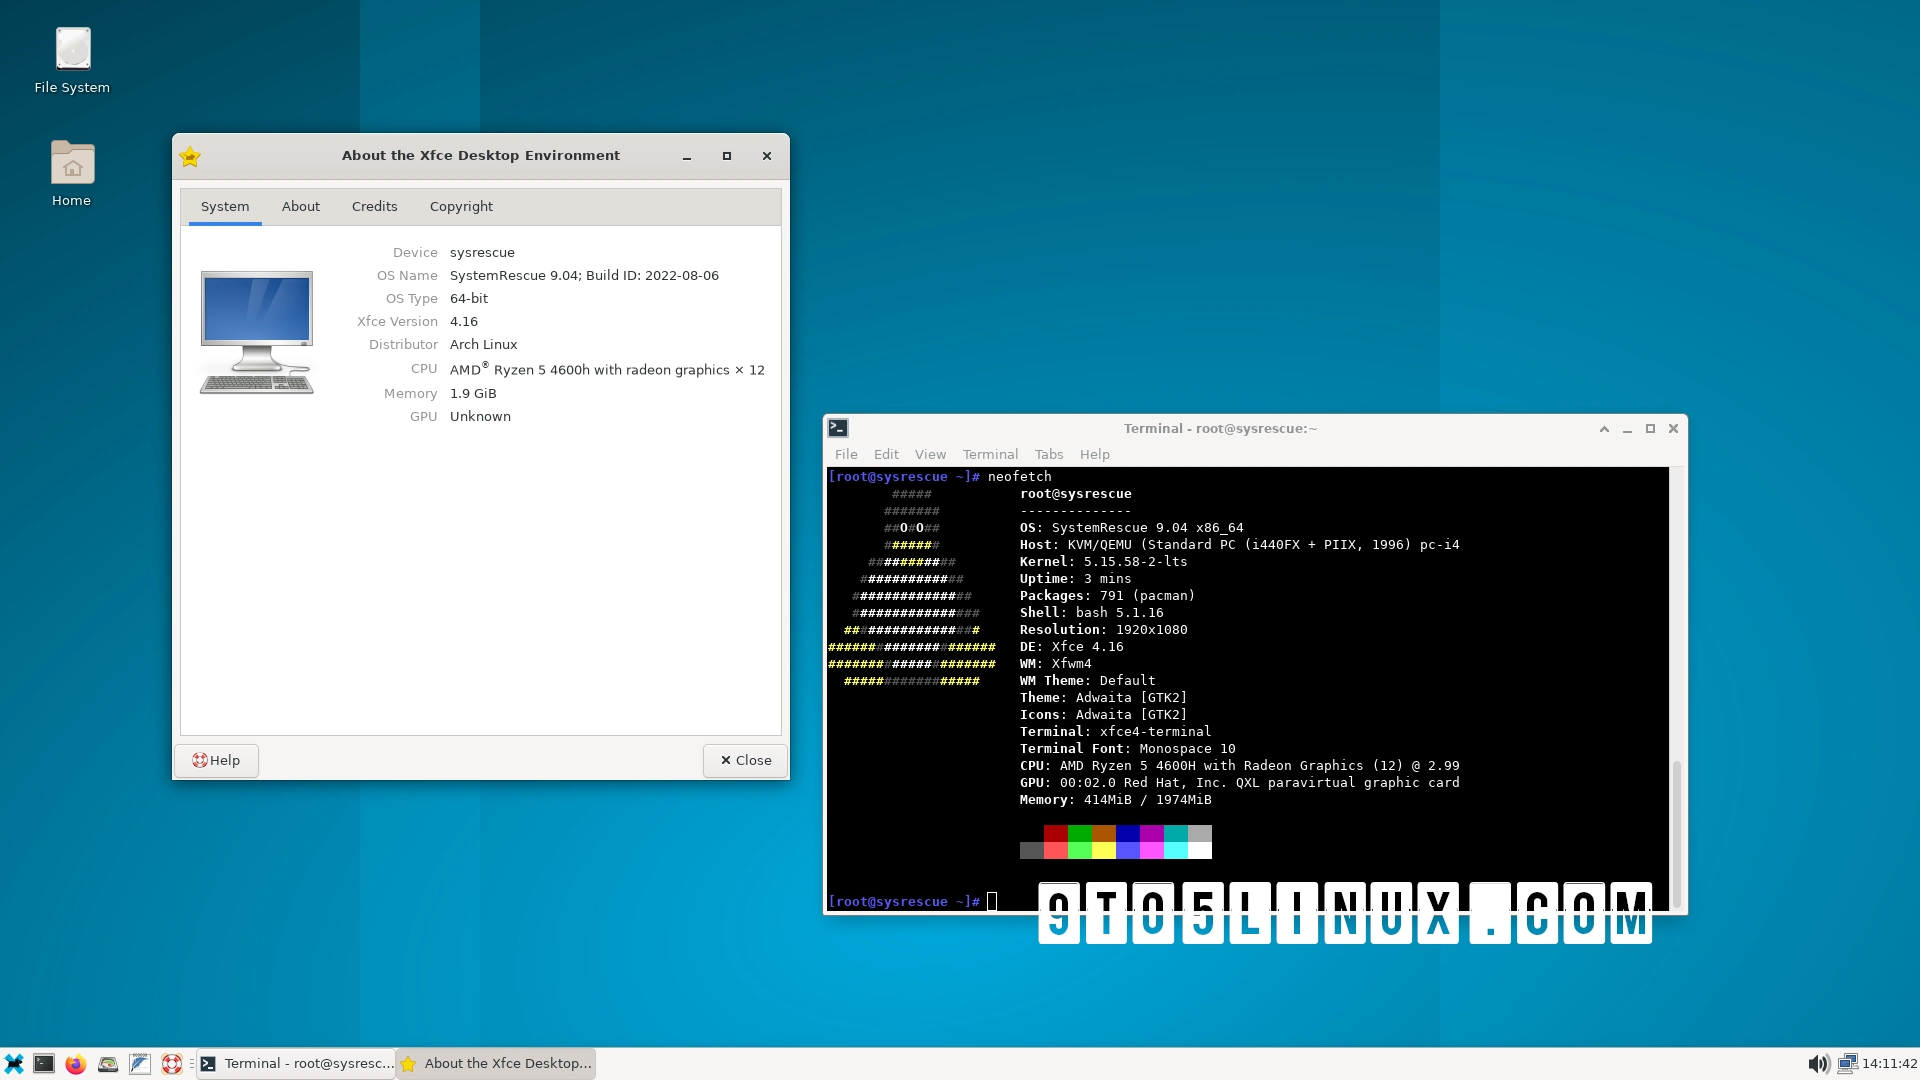 Arch Linux-Based SystemRescue 9.04 Distro Brings New Packages, Improvements